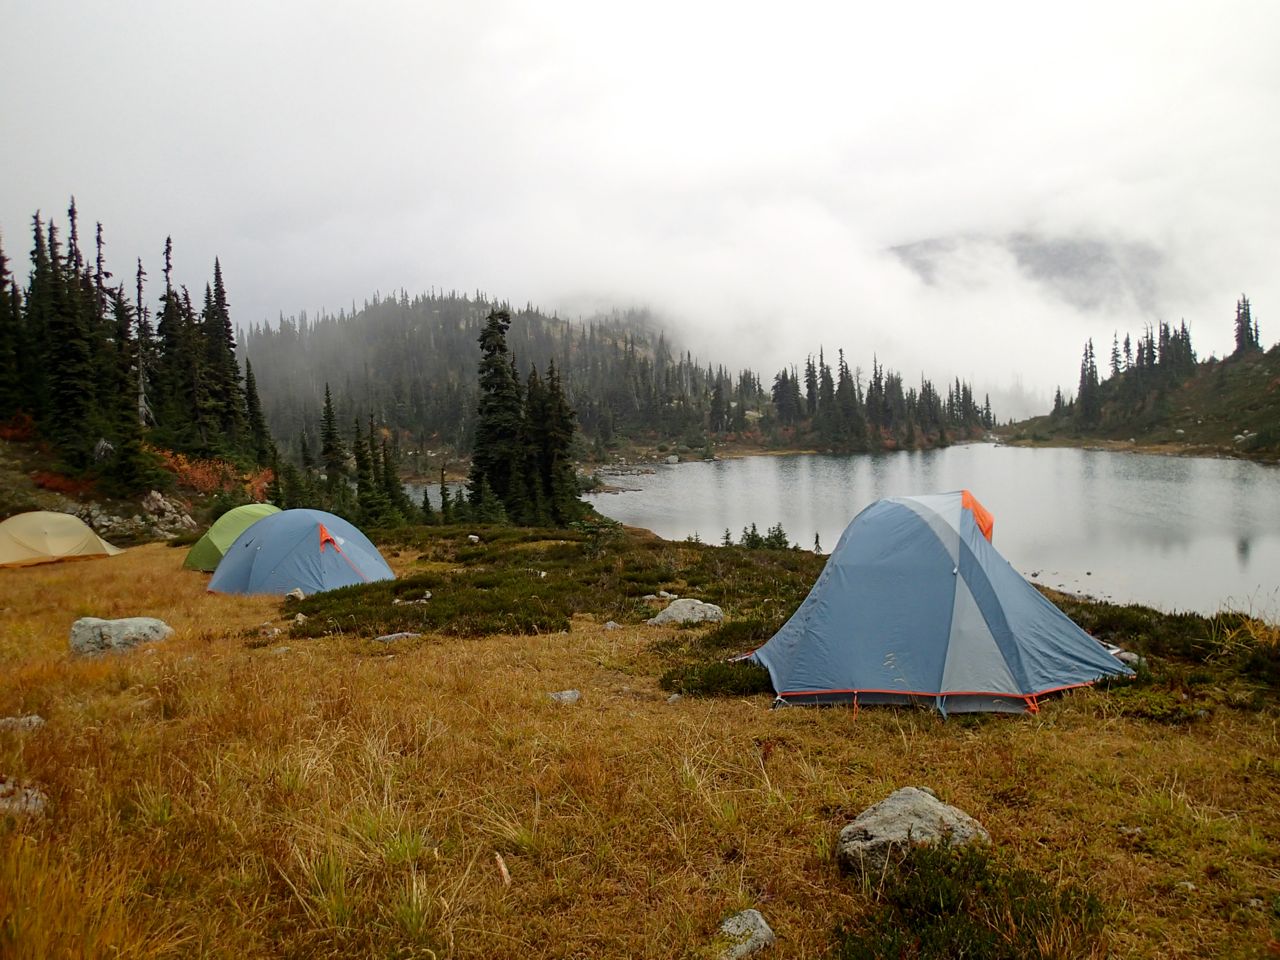 Fall Backpacking Tips: How to Stay Warm and Have Fun